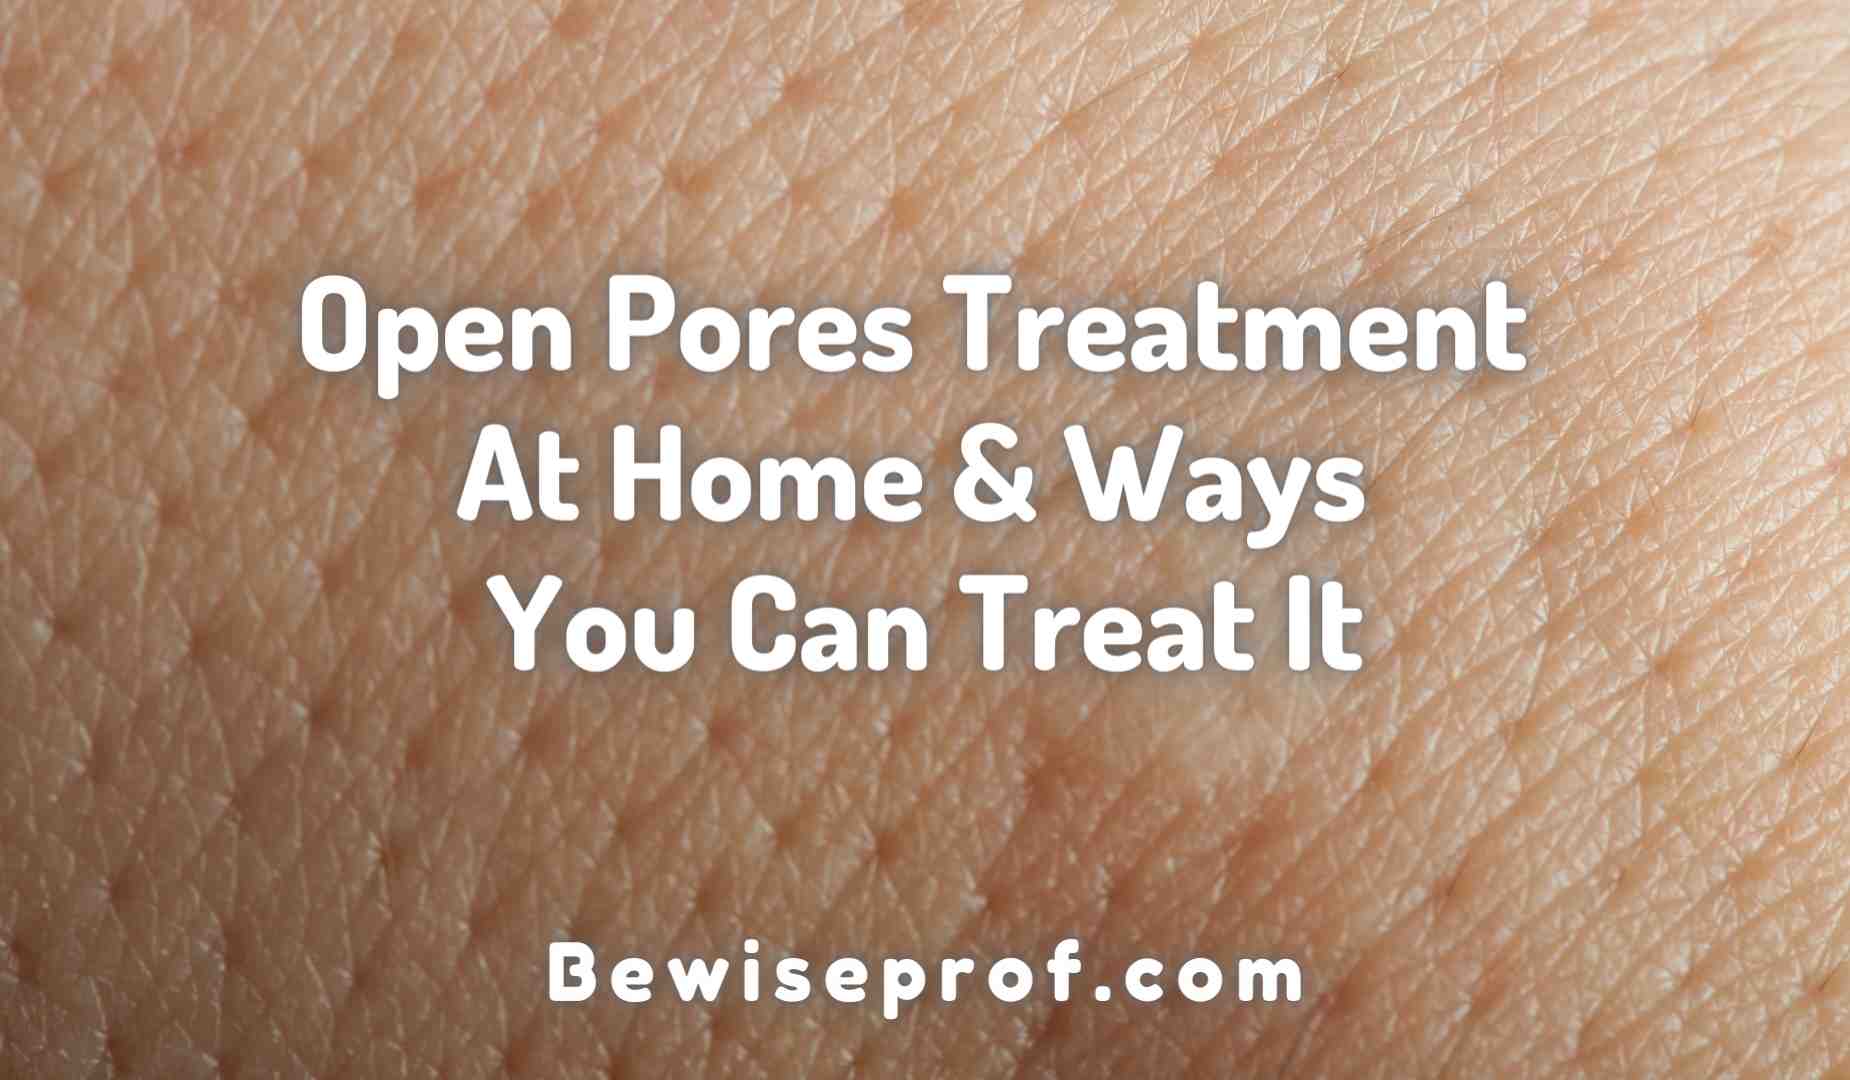 Open Pores Treatment At Home